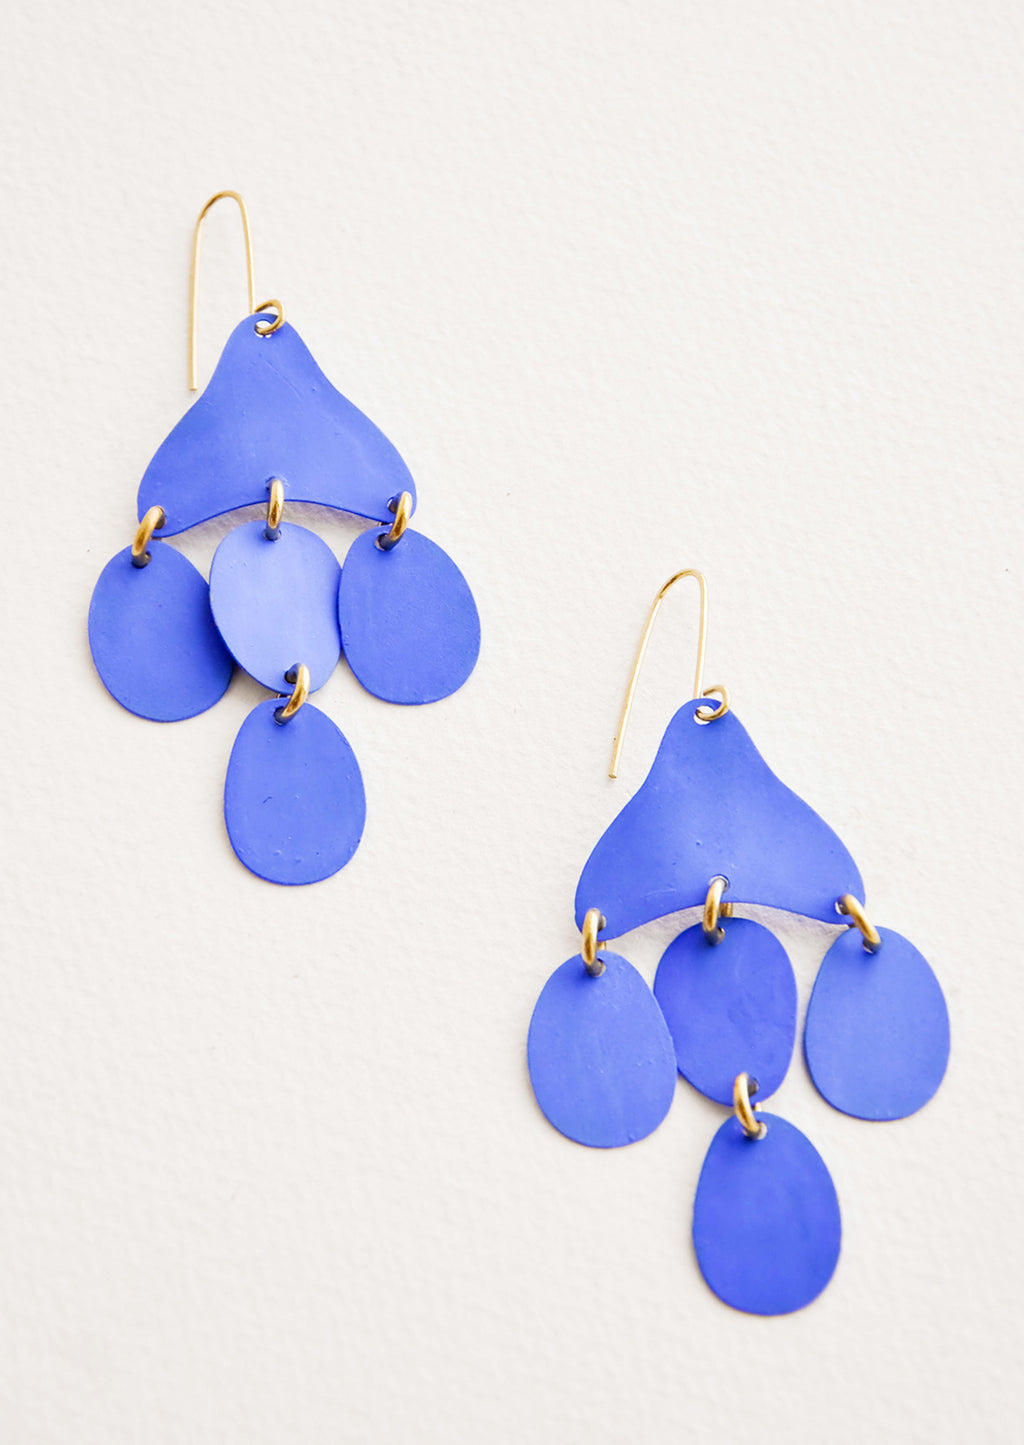 Cielo: Dangling earrings featuring 4 oval shape charms in matte bright blue metal hanging from an asymmetric triangle in the same color.